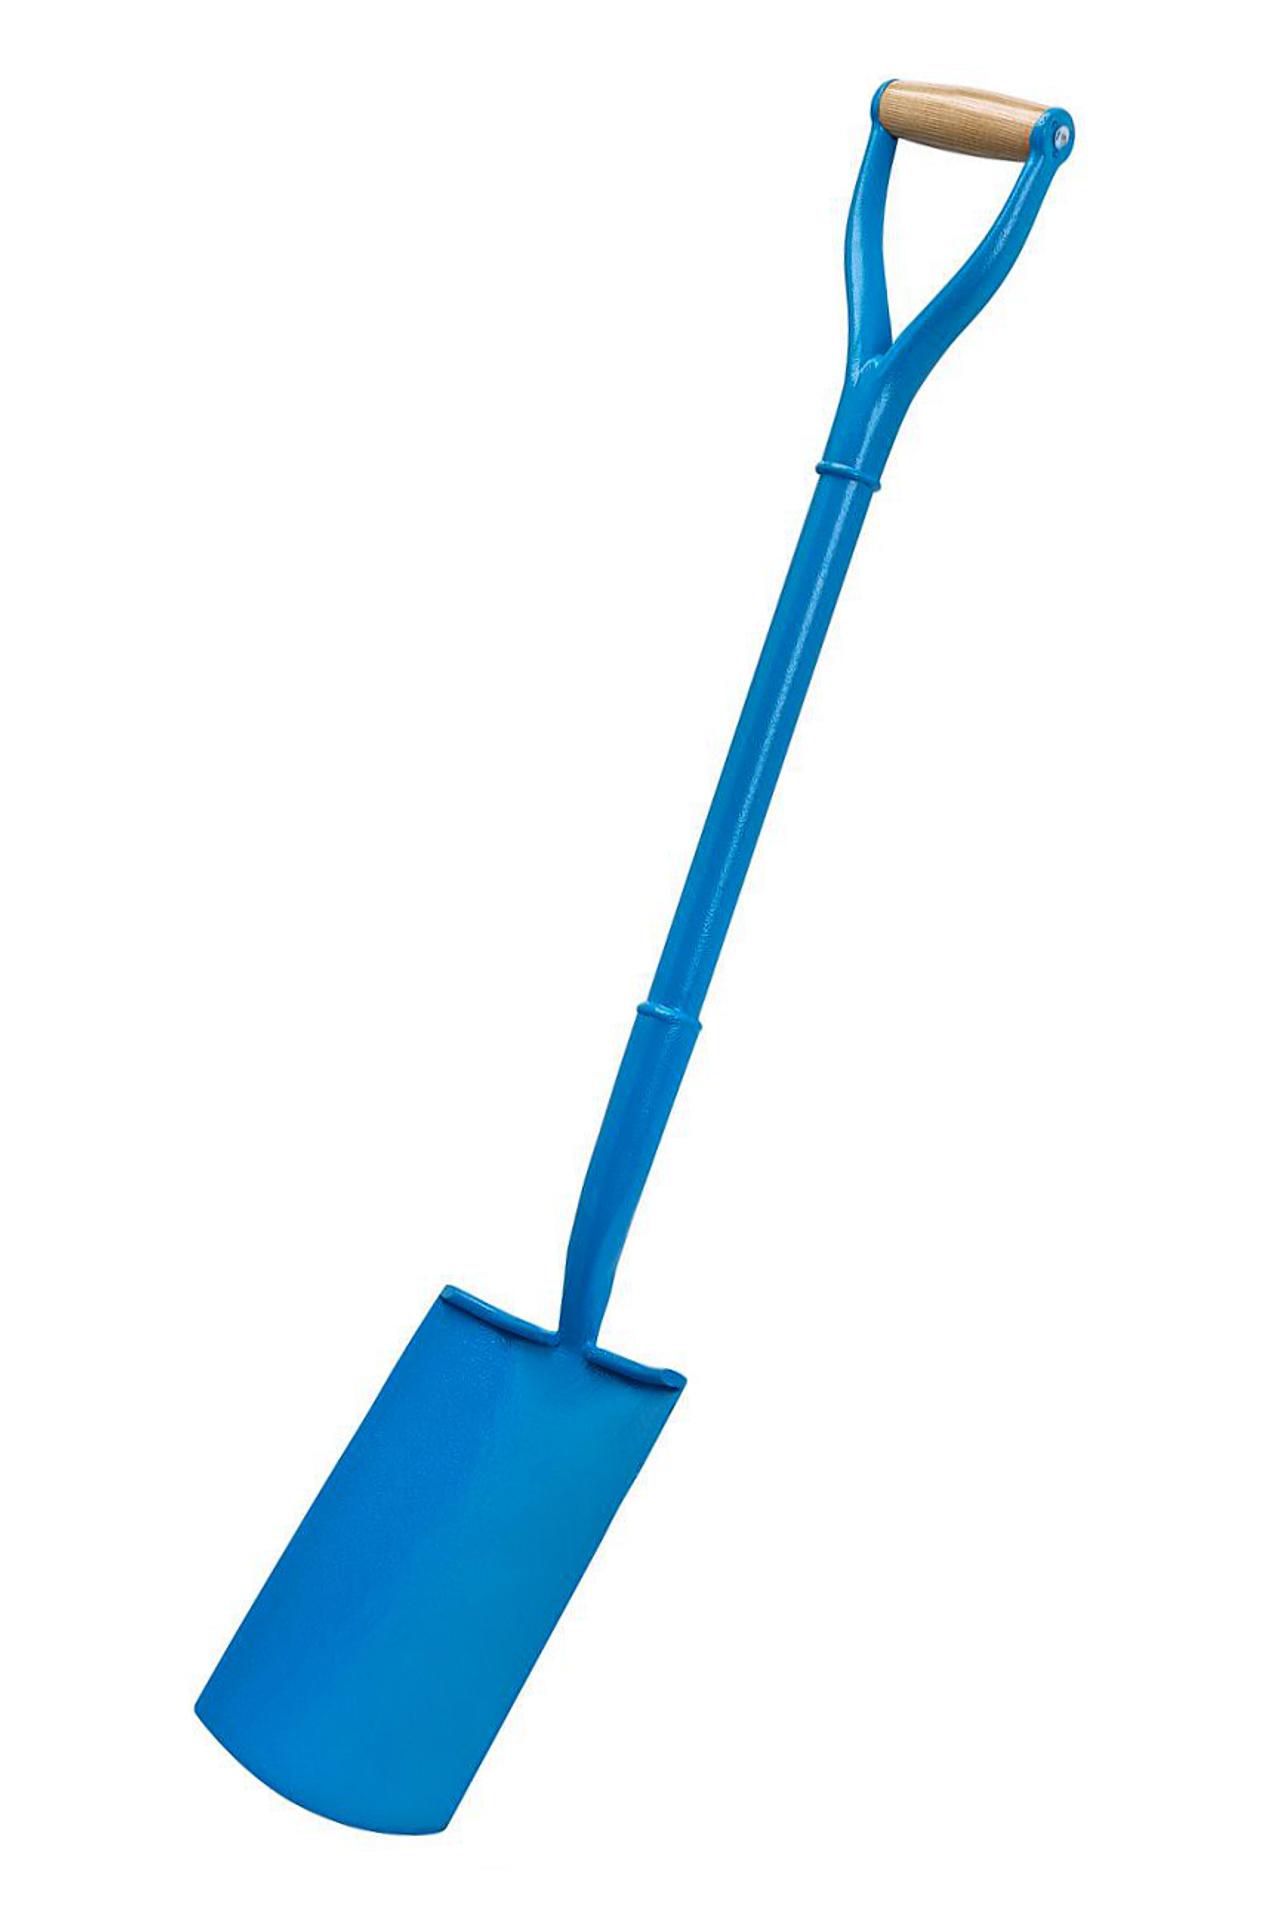 Ox Trade Solid Forged Digging Spade